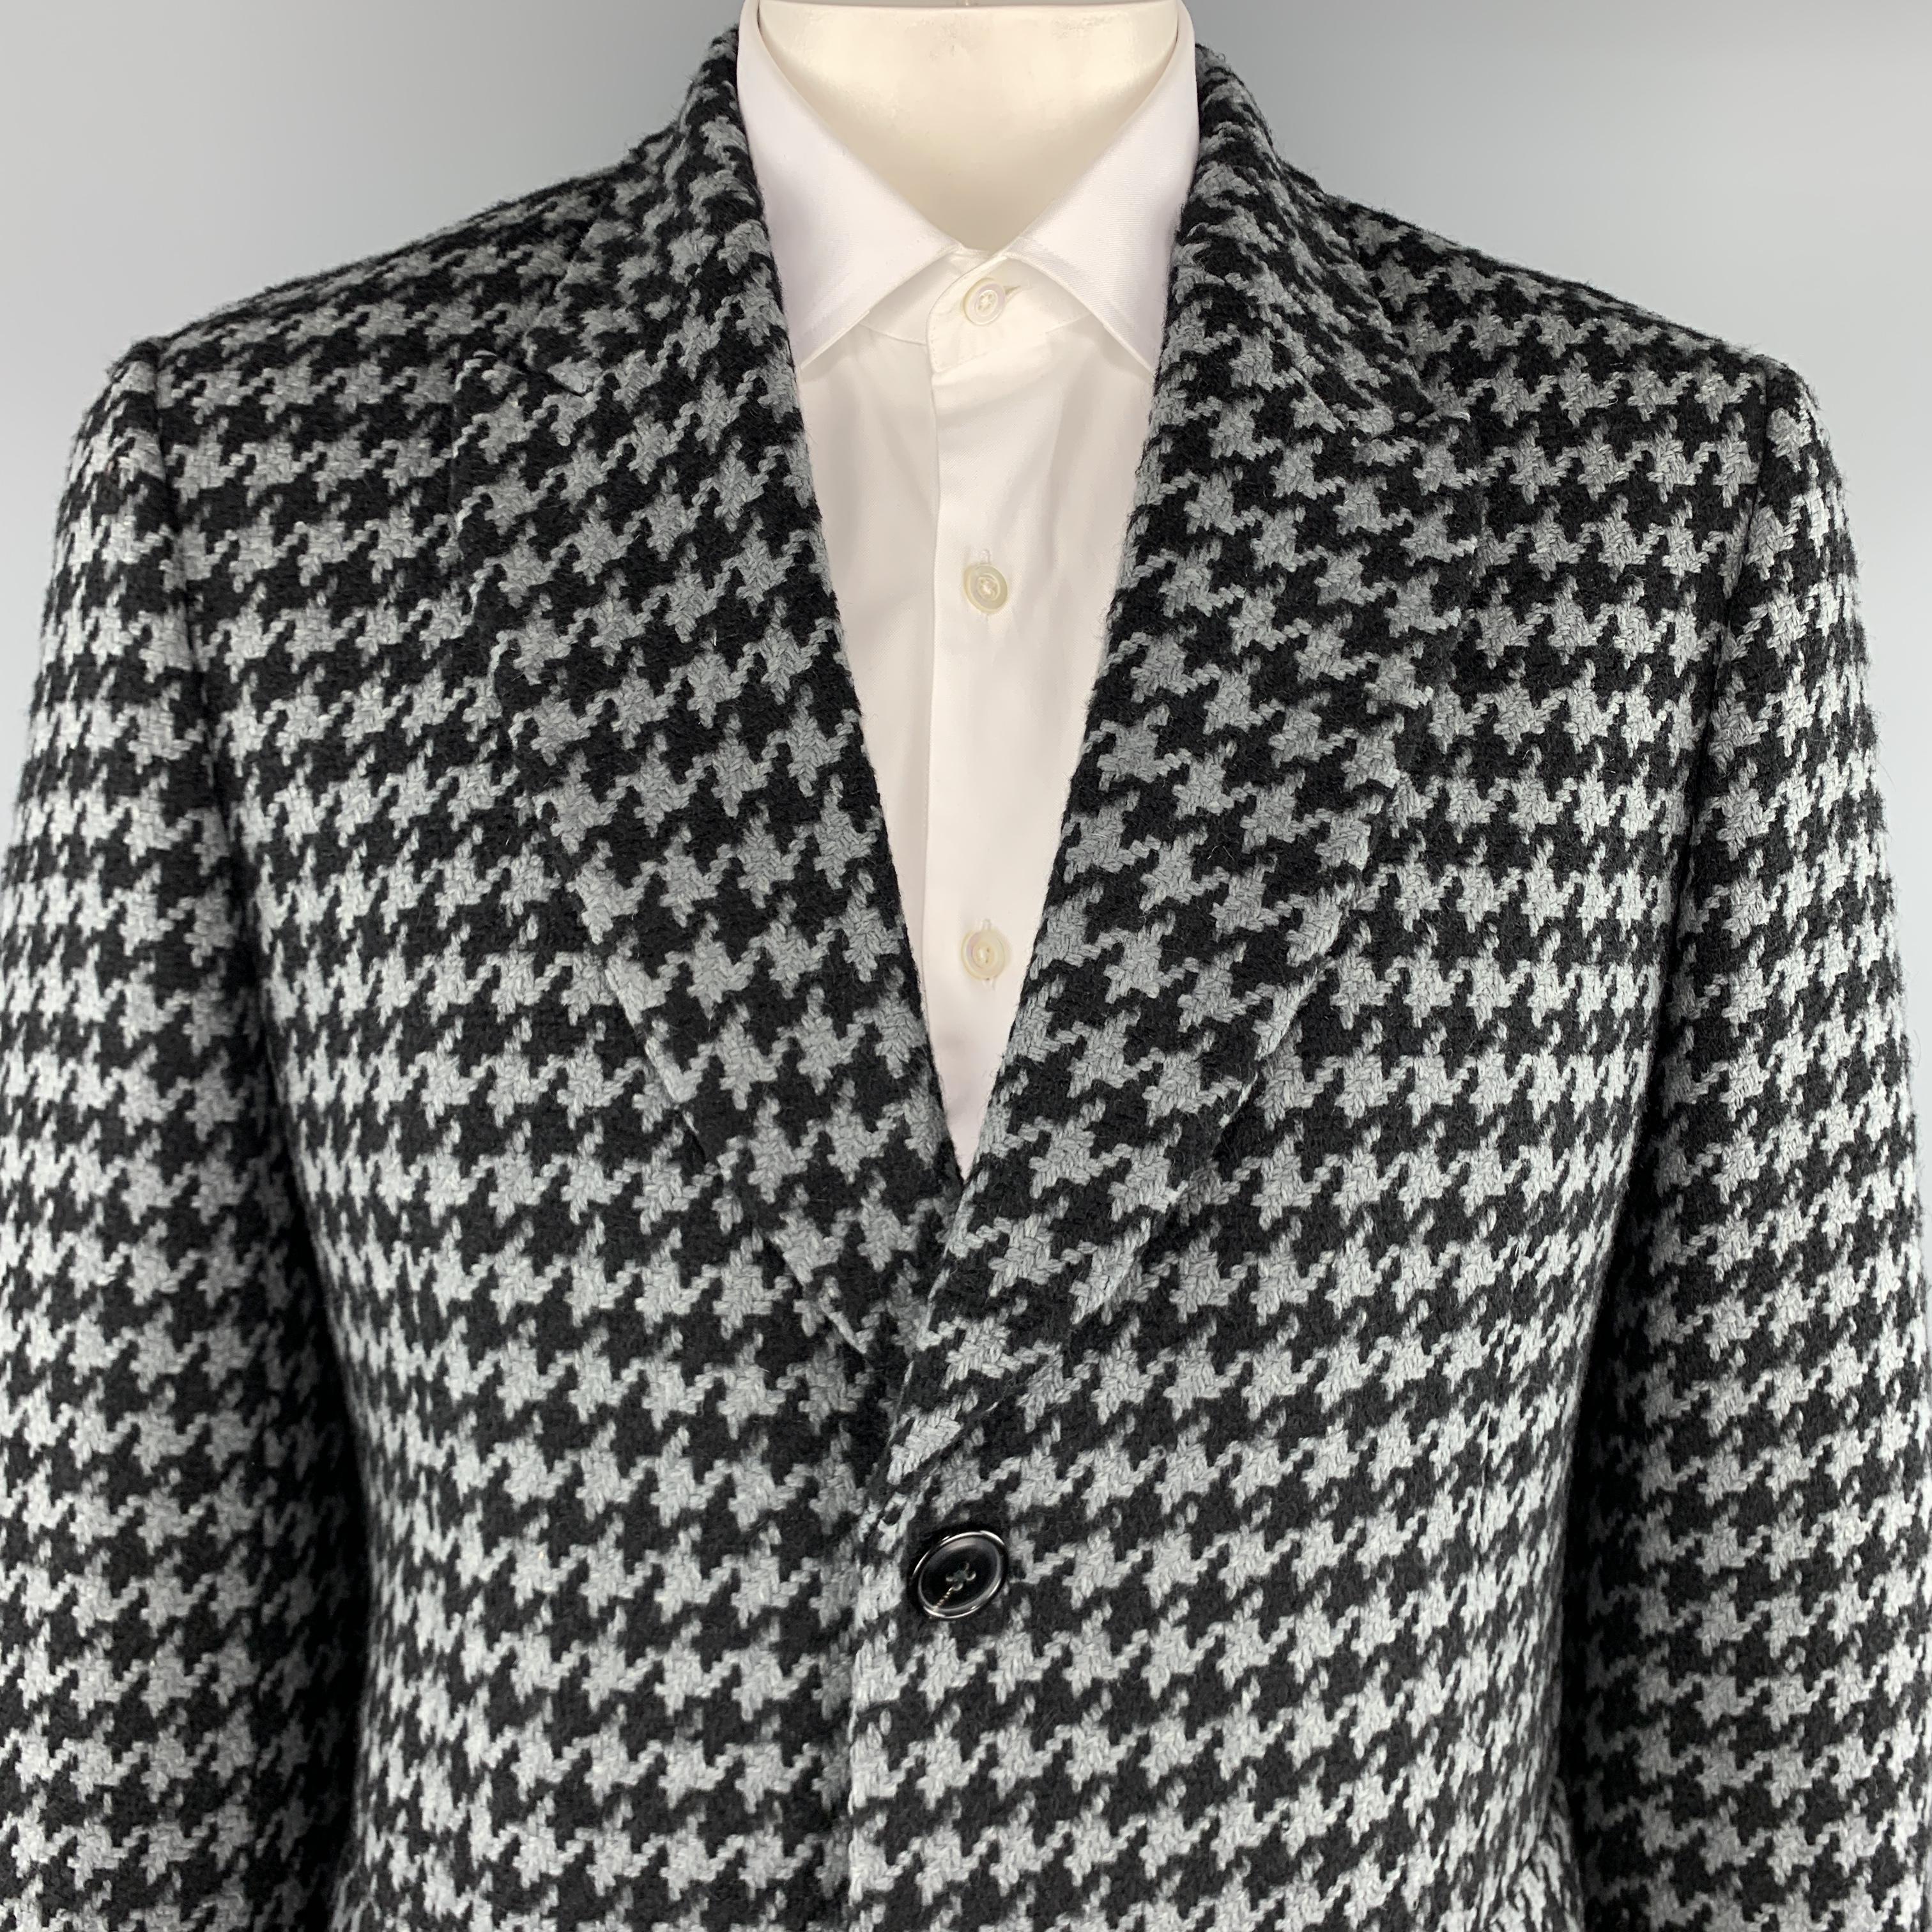 PAUL SMITH coat comes in a muted teal and black houndstooth wool mohair blend tweed with a peak lapel, single breasted three button front, and flap pockets. Made in Italy.

Excellent Pre-Owned Condition.
Marked: 42 R

Measurements:

Shoulder: 18.5